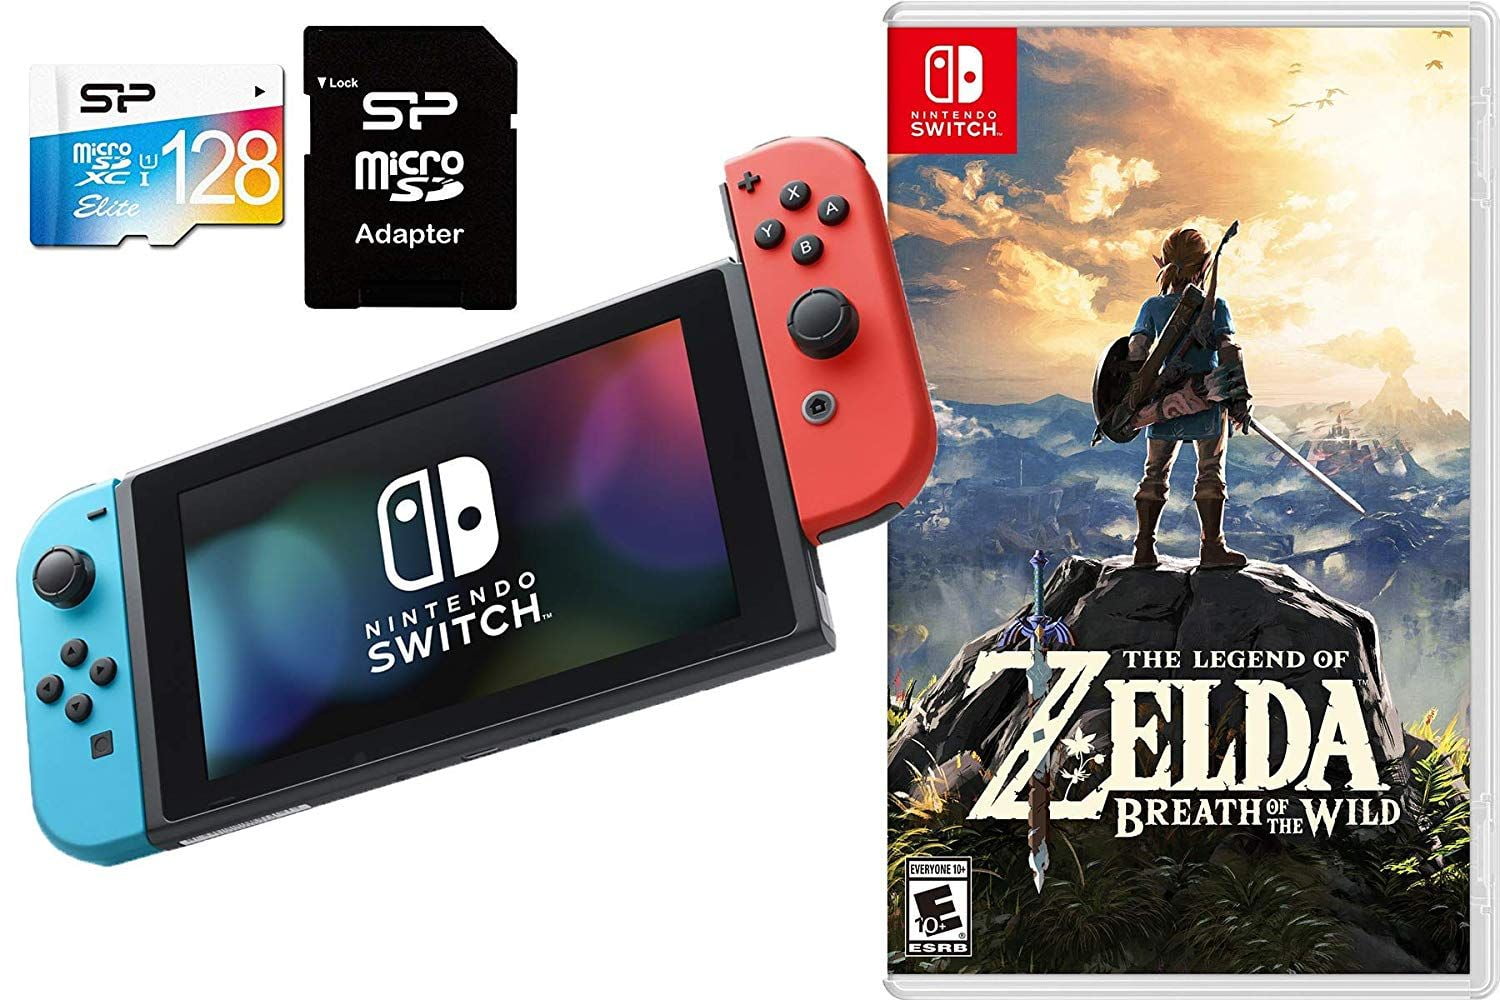 Nintendo Switch Zelda The Legend of Zelda Breath of Wild Nintendo Console with Neon Red and Blue Joy-Con, 128GB SD Card w/ Card Reader, and The Legend of Zelda: